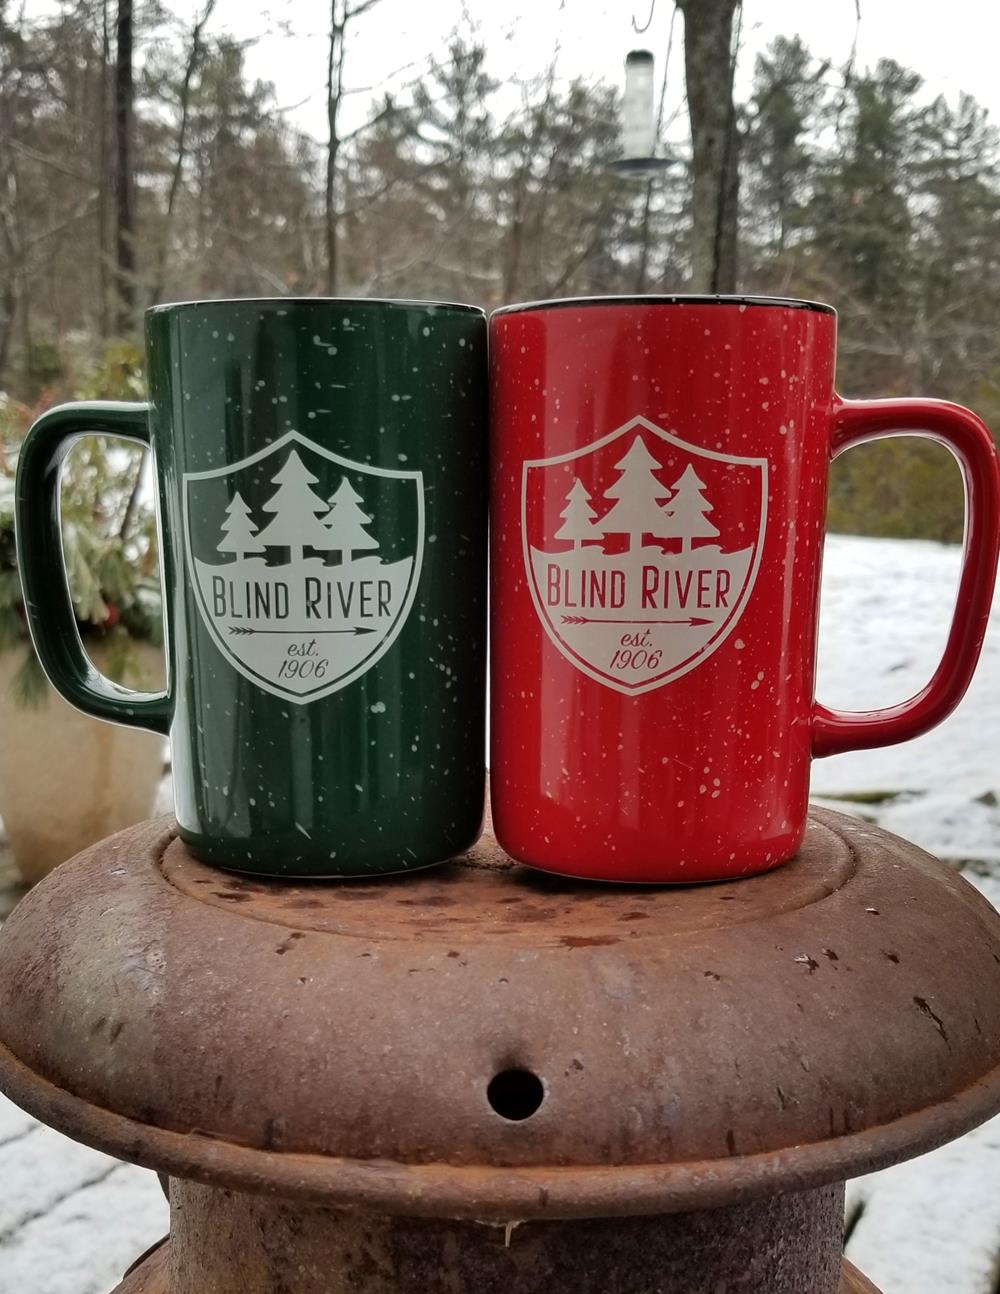 two mugs on a metal surface